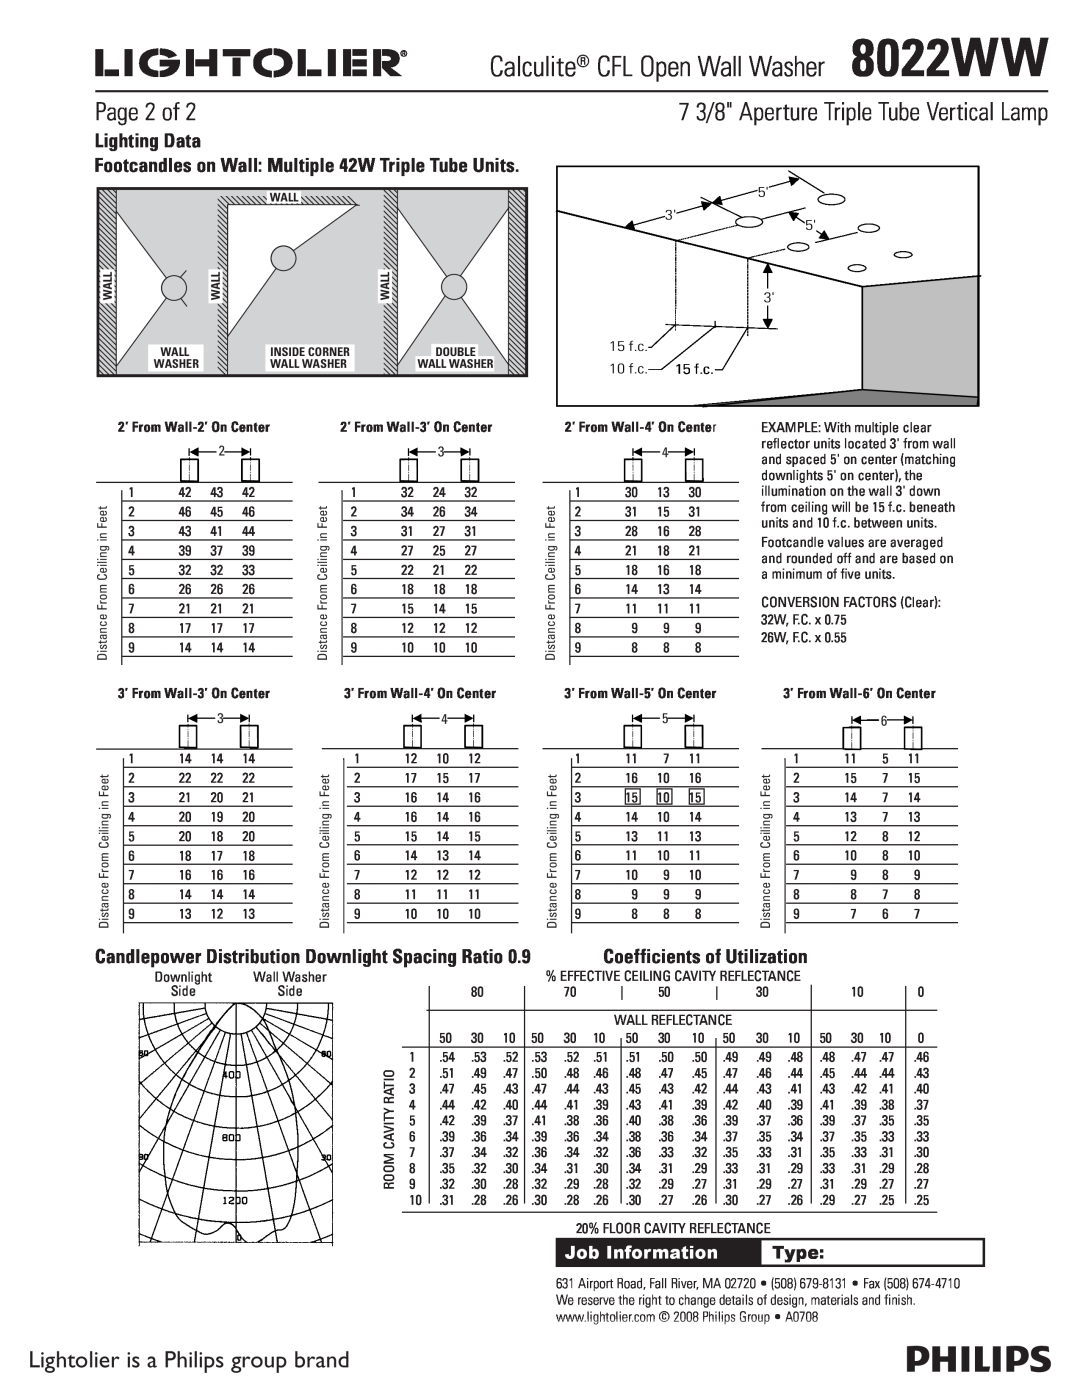 Lightolier 8022WW specifications Page 2 of, 7 3/8 Aperture Triple Tube Vertical Lamp, Lighting Data, Type, Job Information 